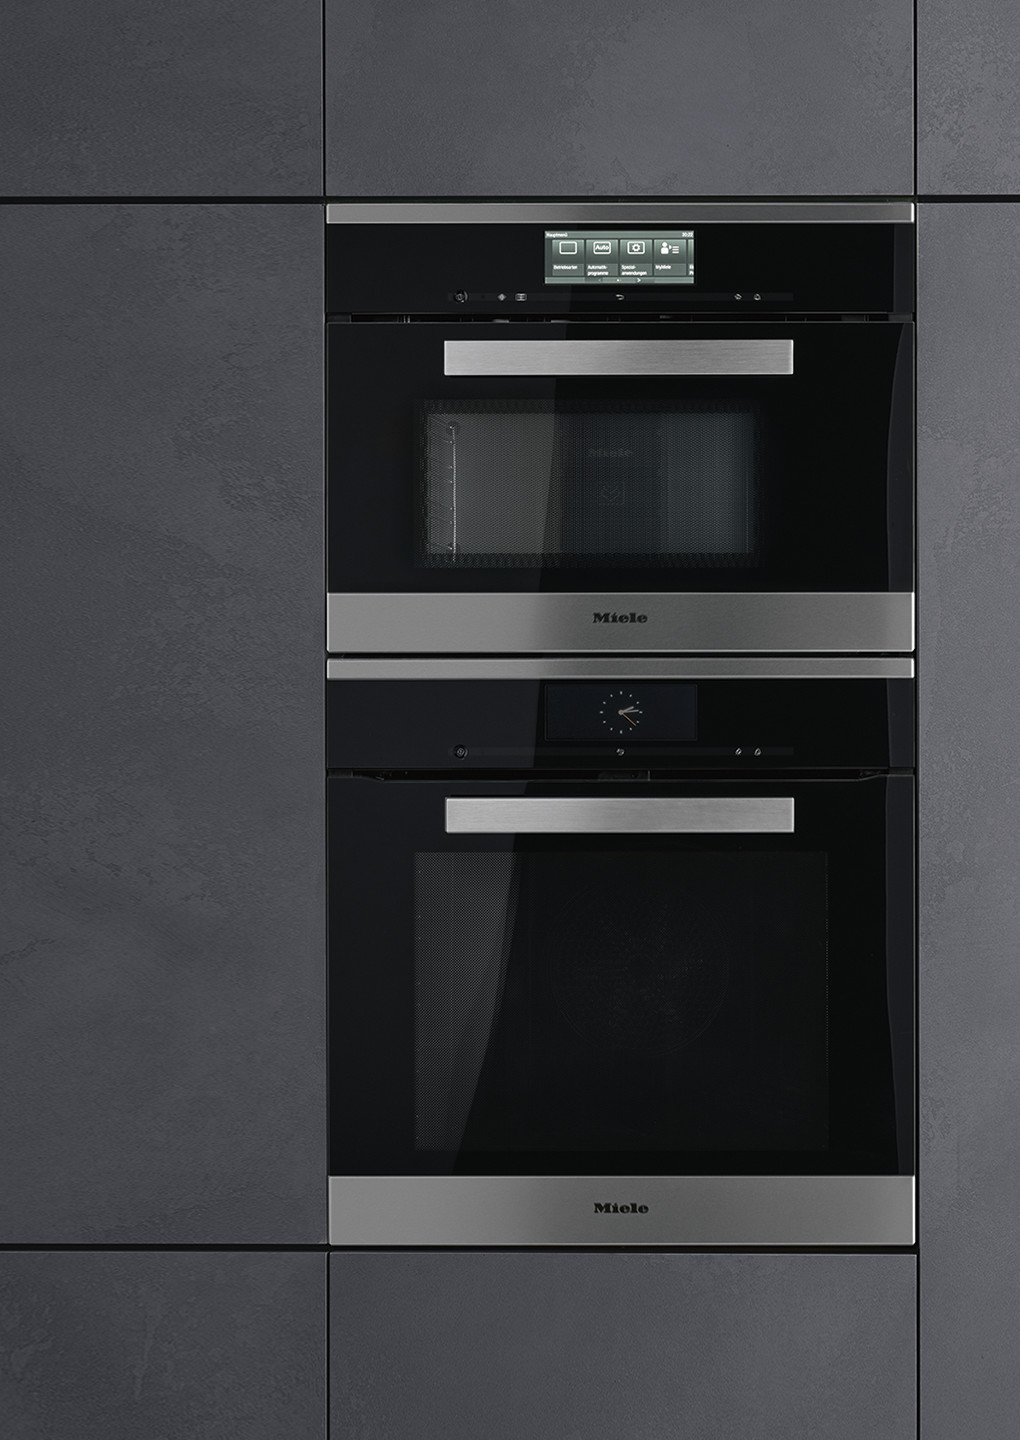 Steam Oven vs. Microwave - What's the Difference?